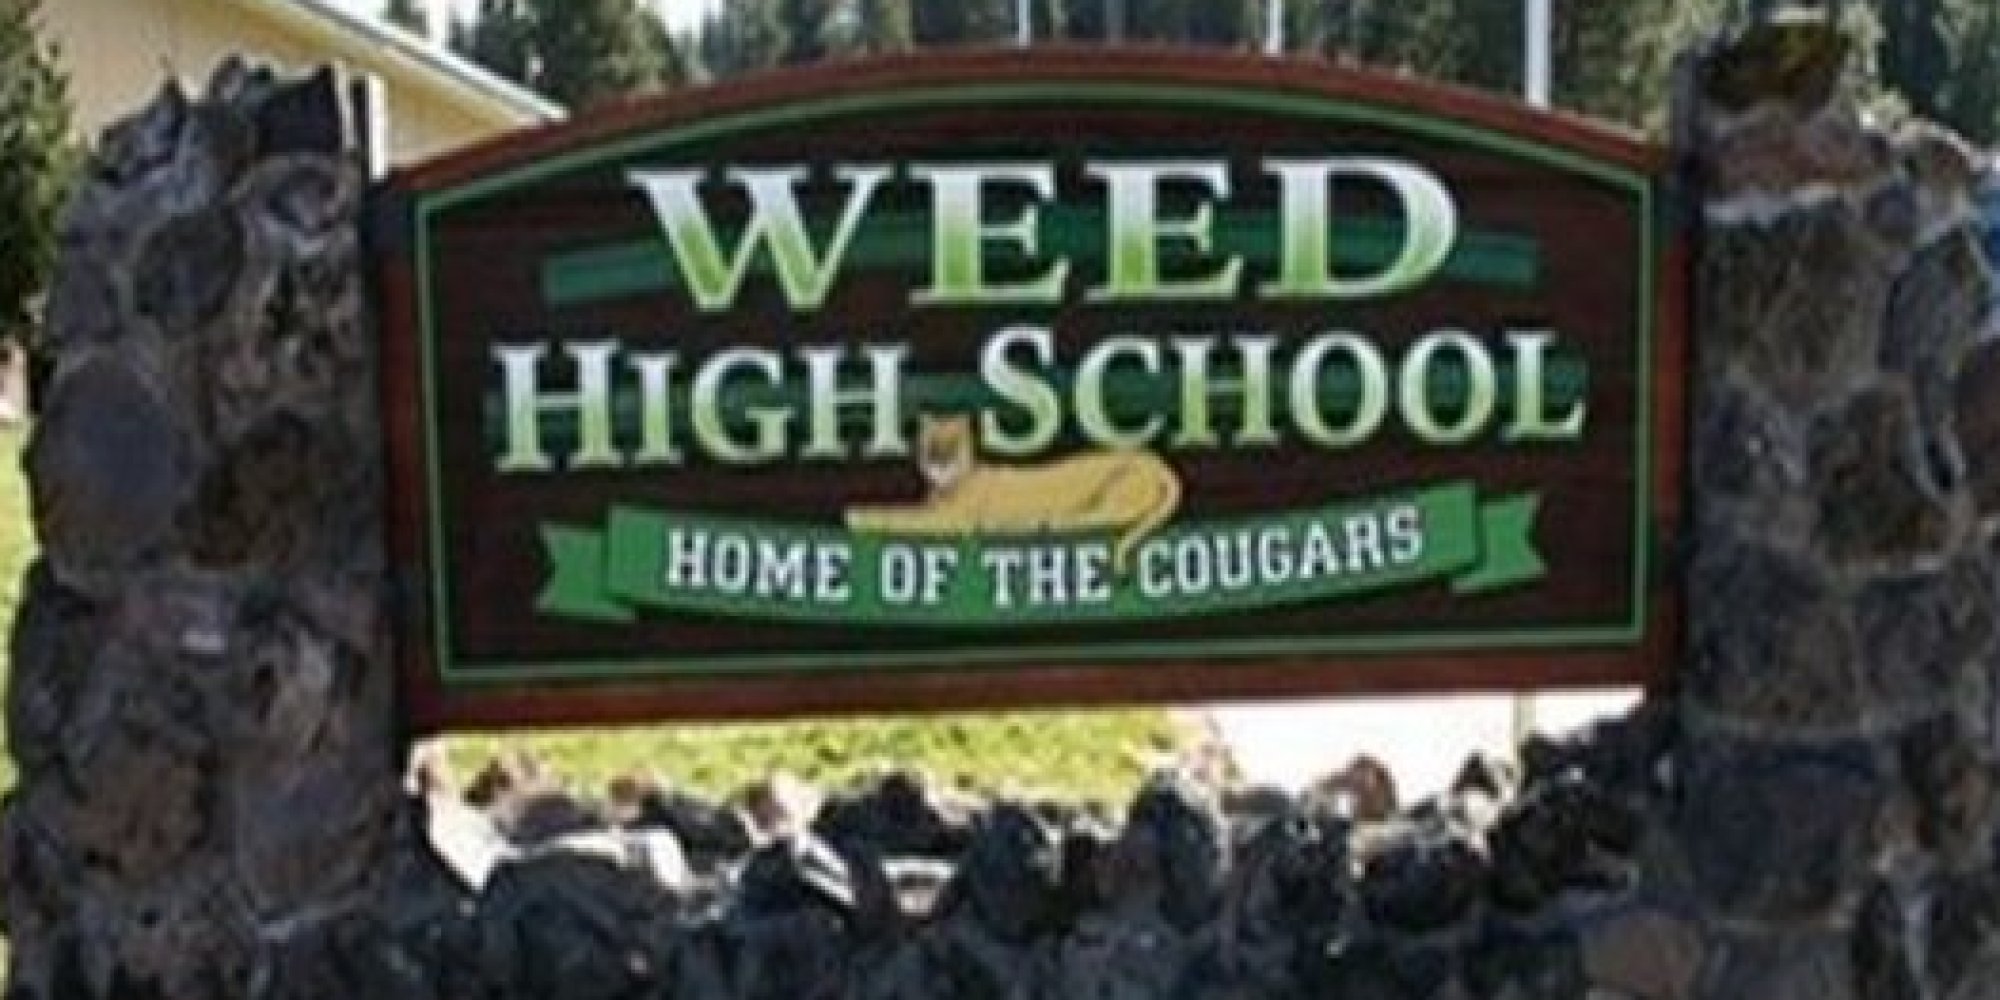 school name worst high school names - Weed High School Home Of The Cougarsk